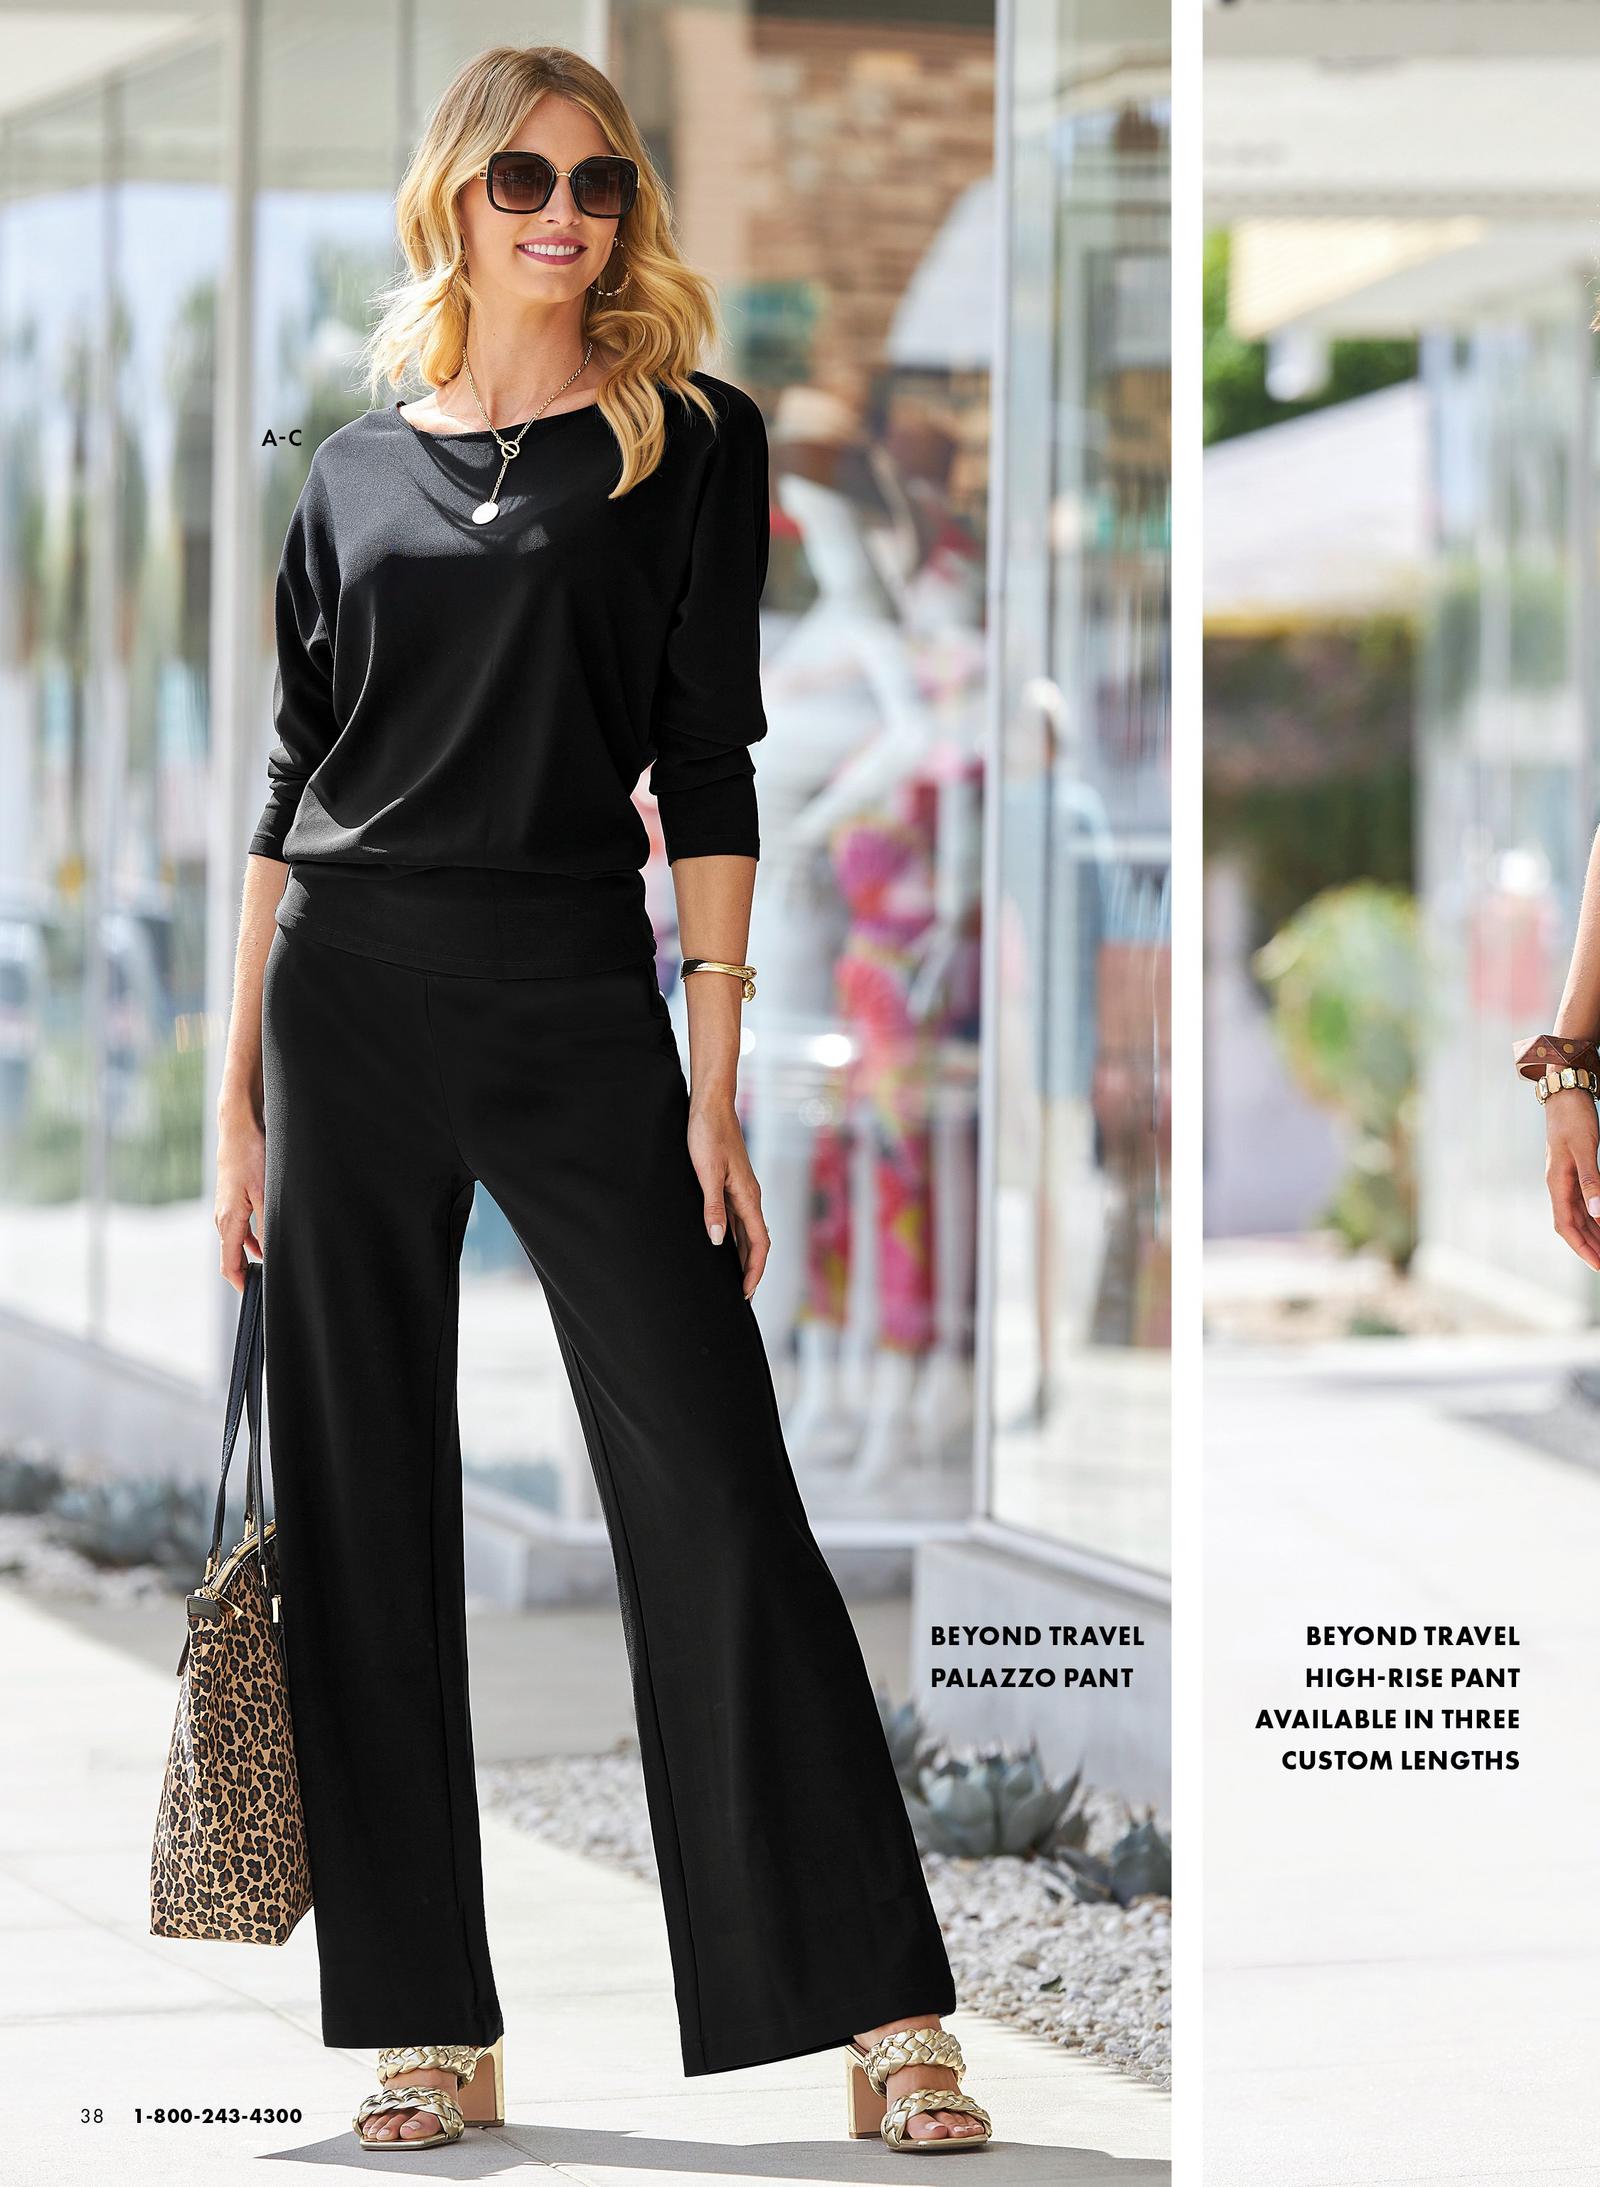 Model is wearing the beyond travel slouchy top in black, the beyond travel palazzo pant in black and the woven braided block heel sandal.